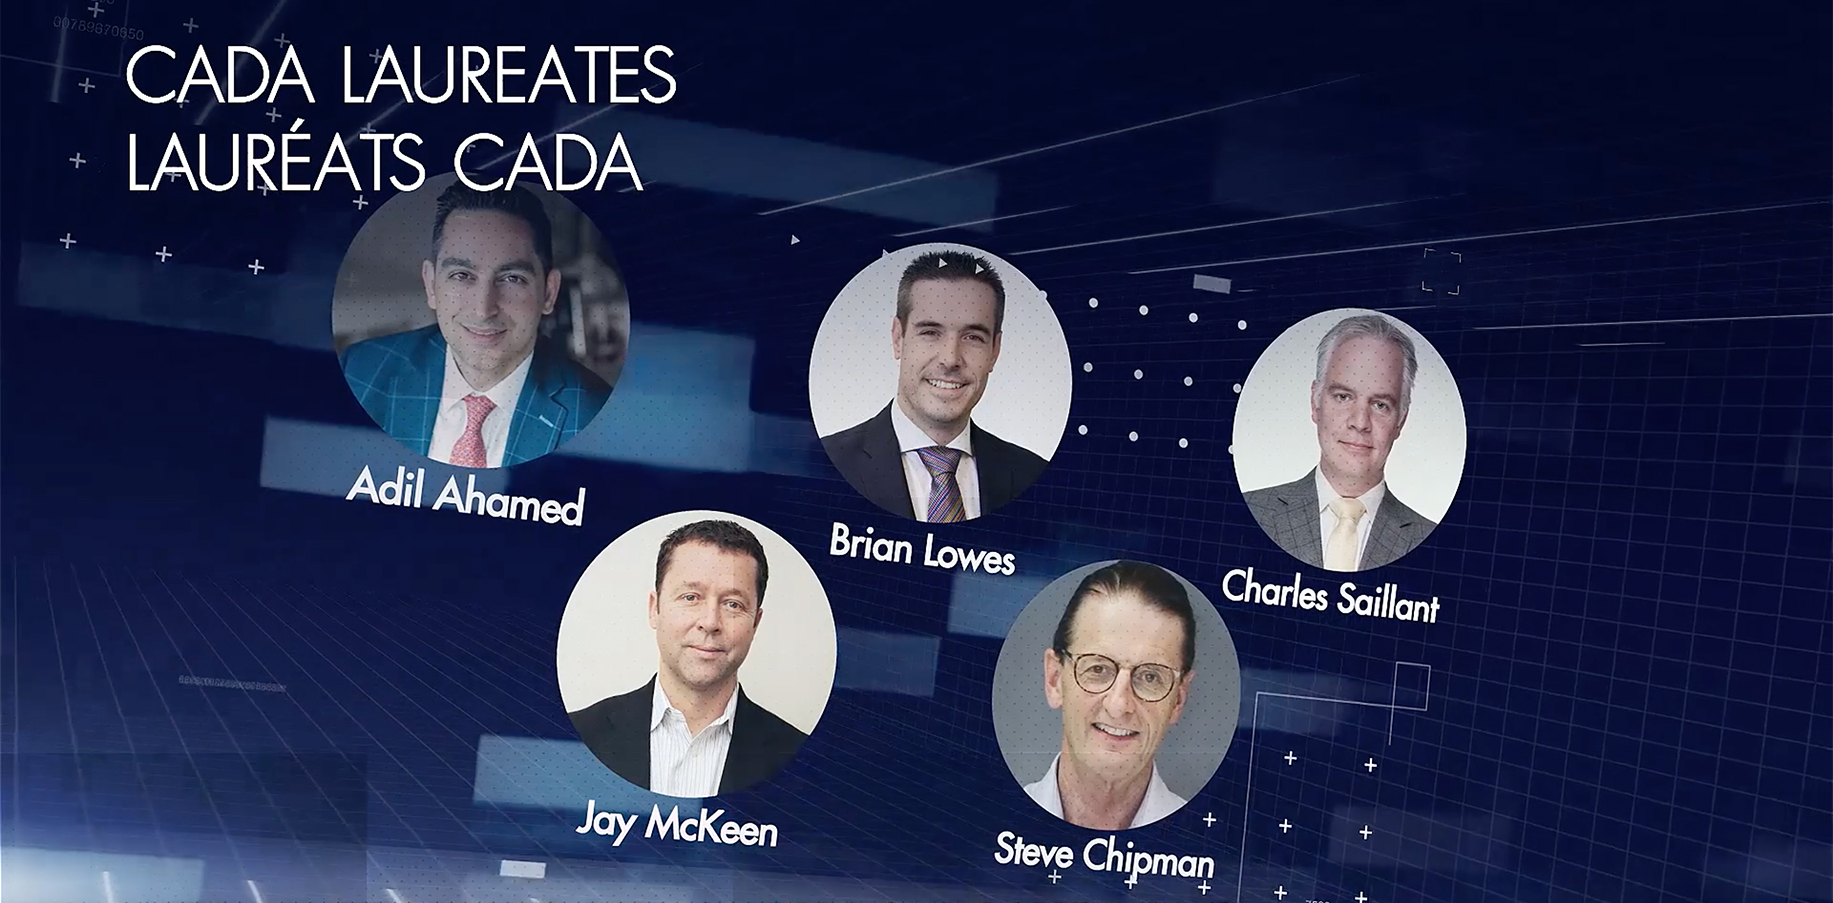 Second CADA Laureate Perspectives Video released